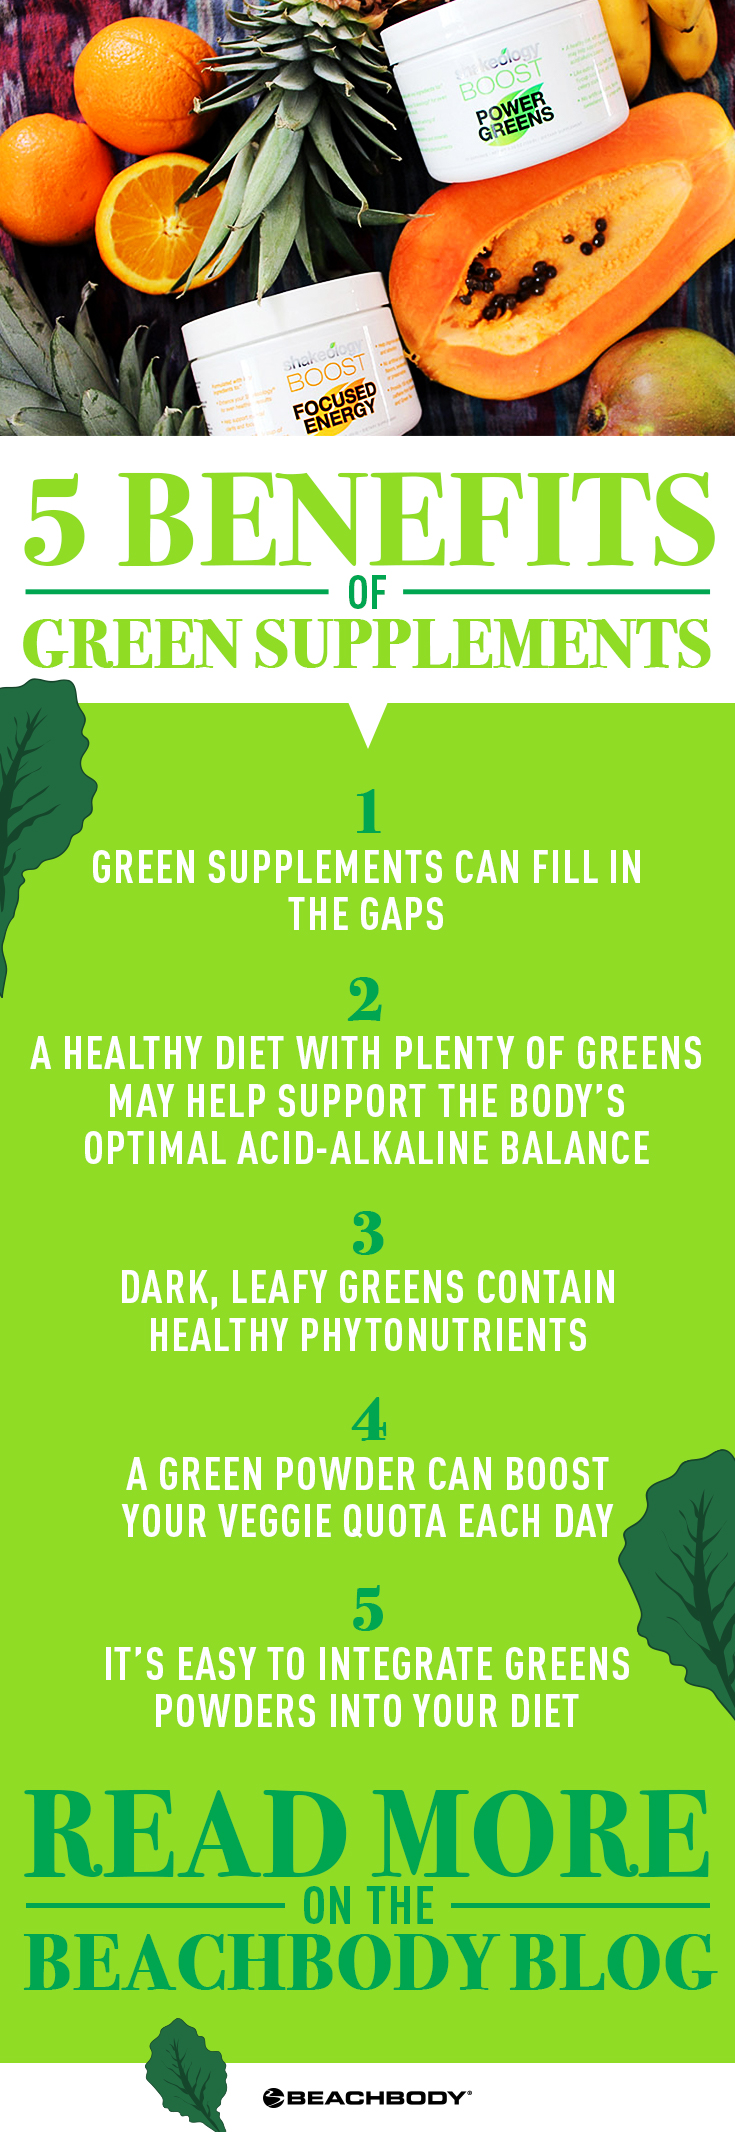 The Only Guide to Greens Supplement Review: A Look At The Top 13 Brands